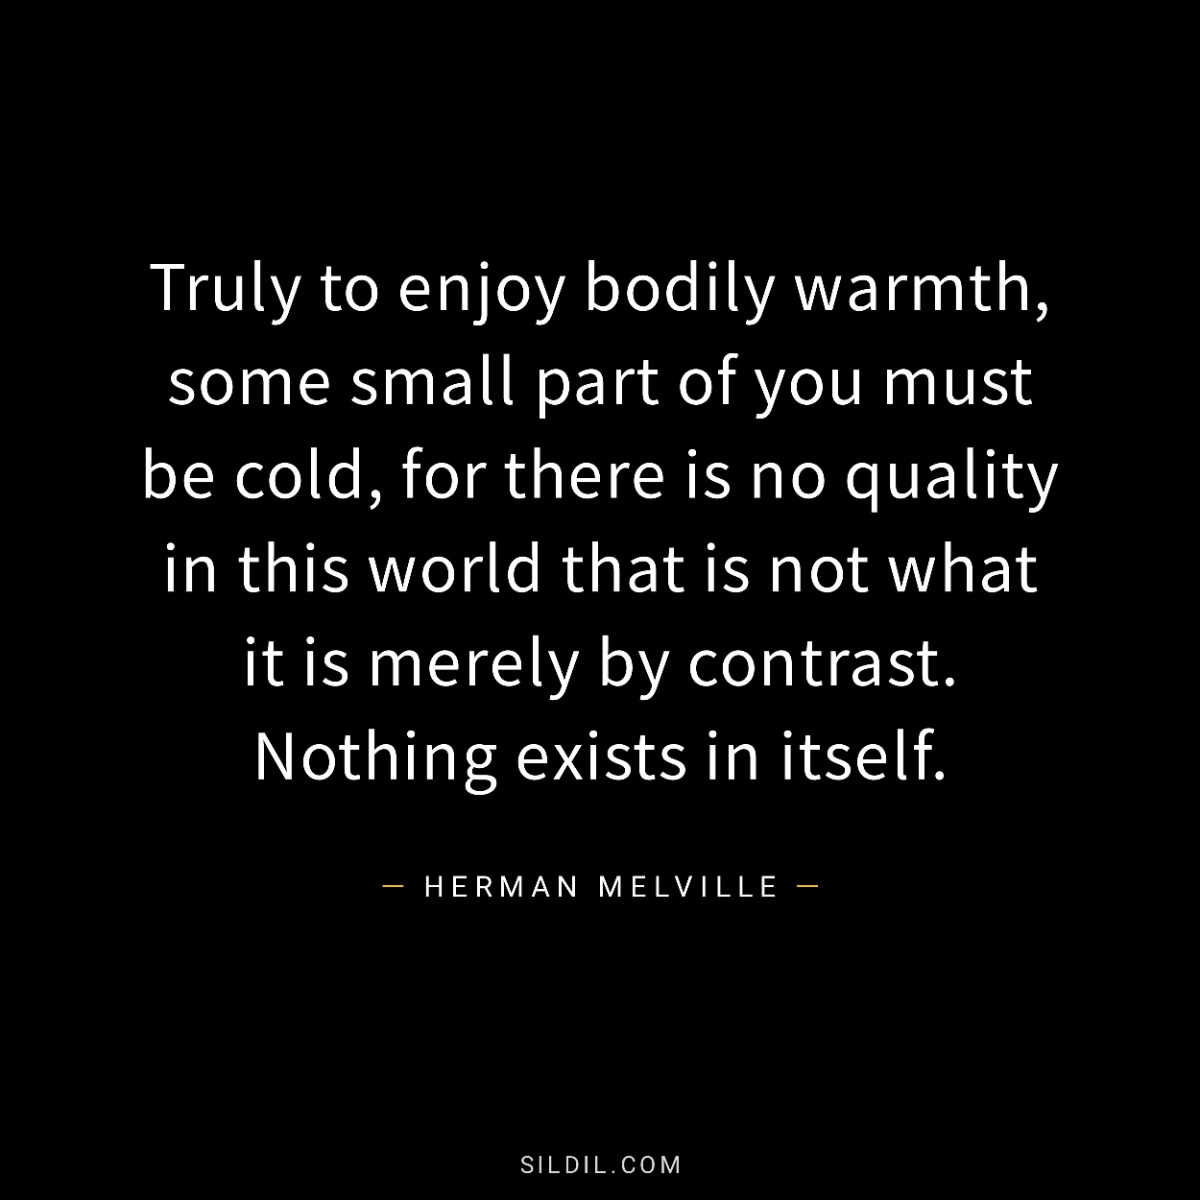 Truly to enjoy bodily warmth, some small part of you must be cold, for there is no quality in this world that is not what it is merely by contrast. Nothing exists in itself.